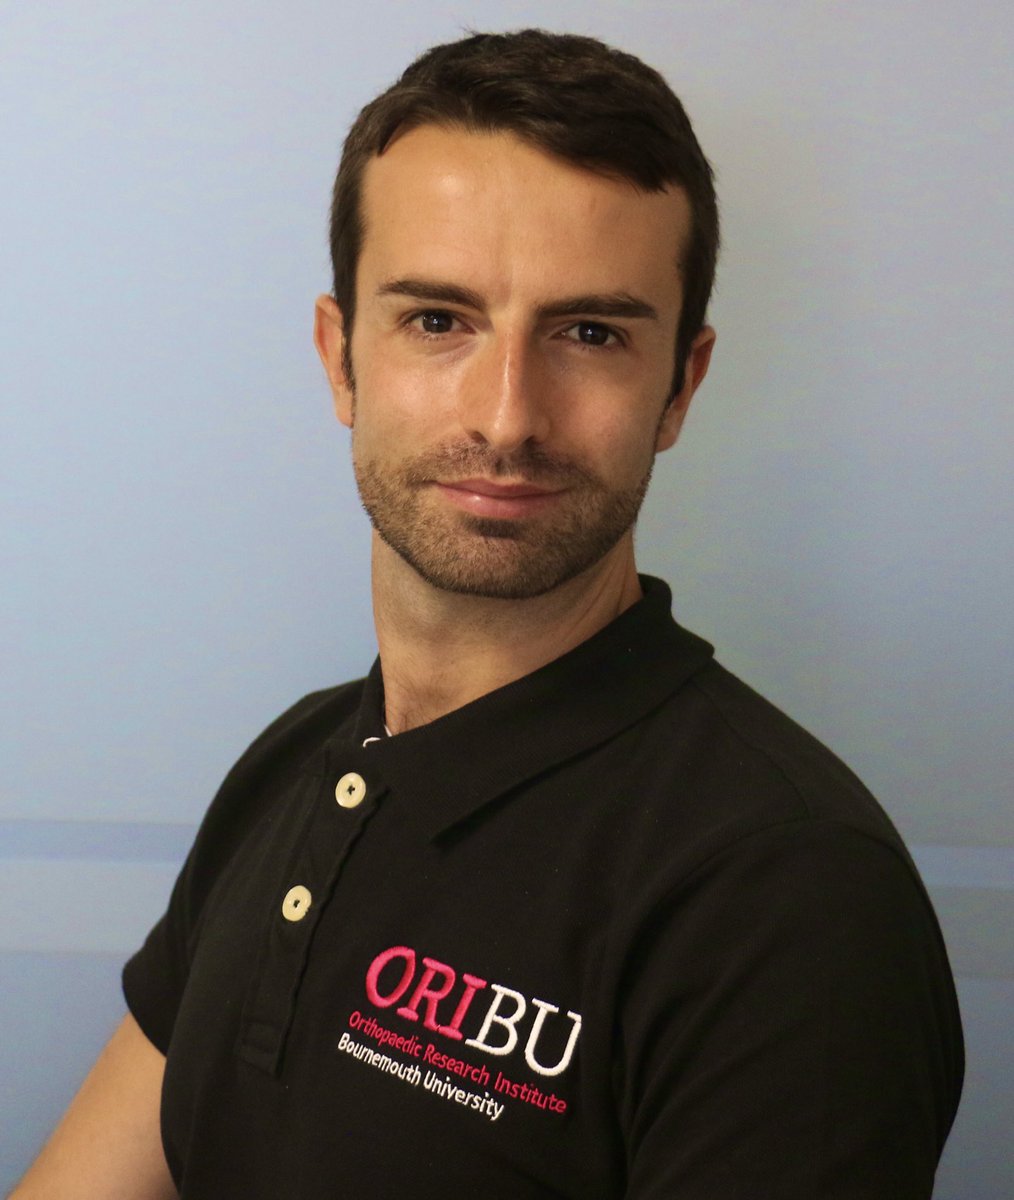 We would like to welcome our new member of staff, Dr Francesco Ferraro, to our ever-expanding ORI team!👨🏻‍💻Francesco will be working as a Clinical Trial Manager to evaluate the health outcomes after #Mako #Robotic total #hip replacement 
#THR #research 

microsites.bournemouth.ac.uk/ori/2019/06/07…